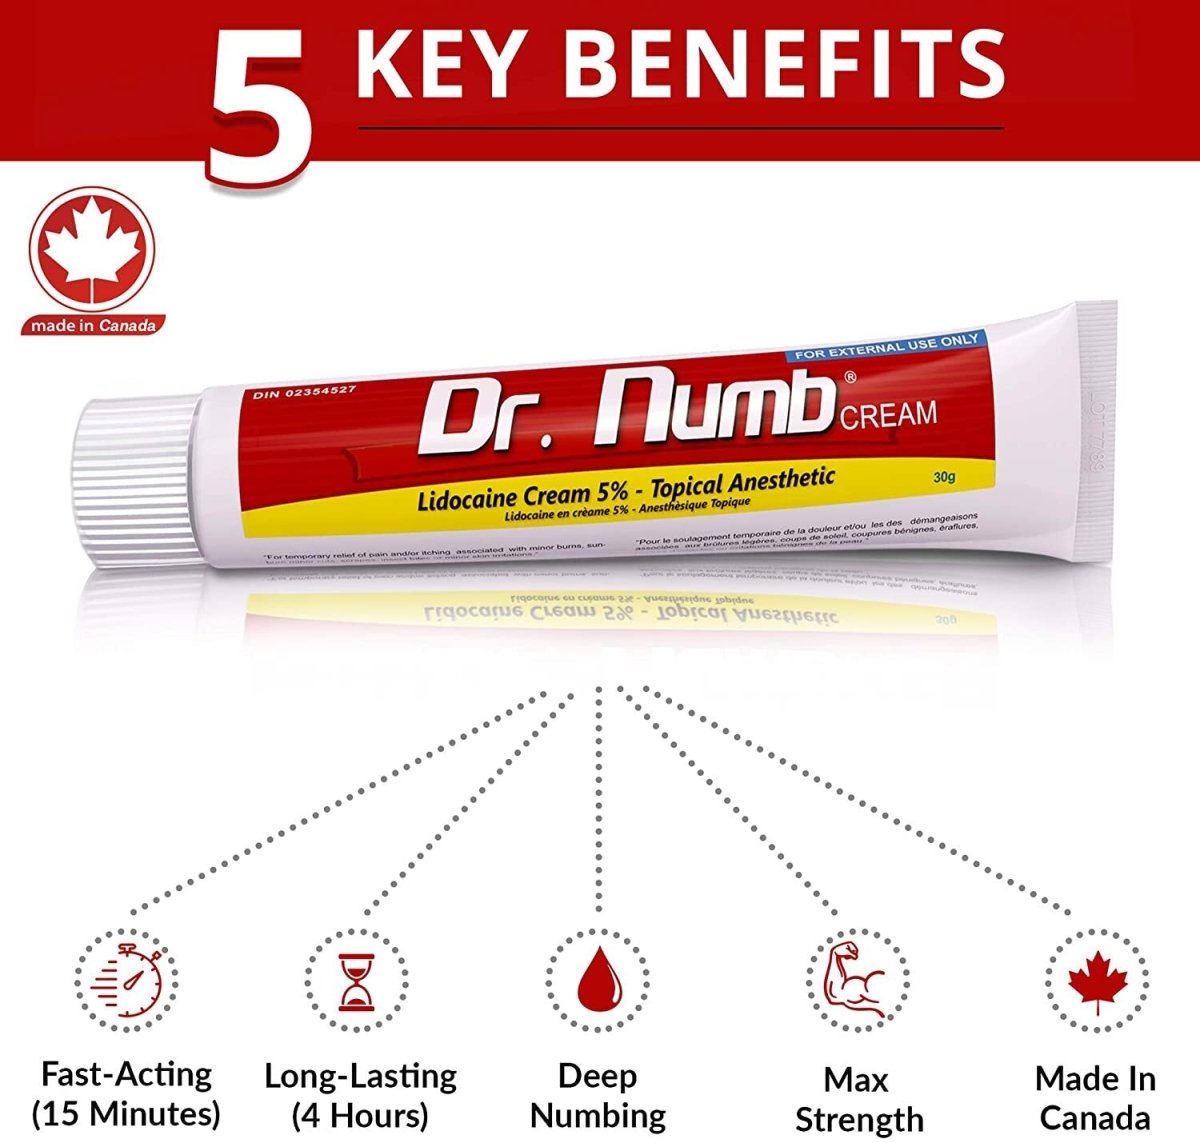 Dr Numb 5% Lidocaine Cream | Topical Numbing Cream for Laser, Microneedling + Tattoo Removal - Beauty Pro Supplies Canada